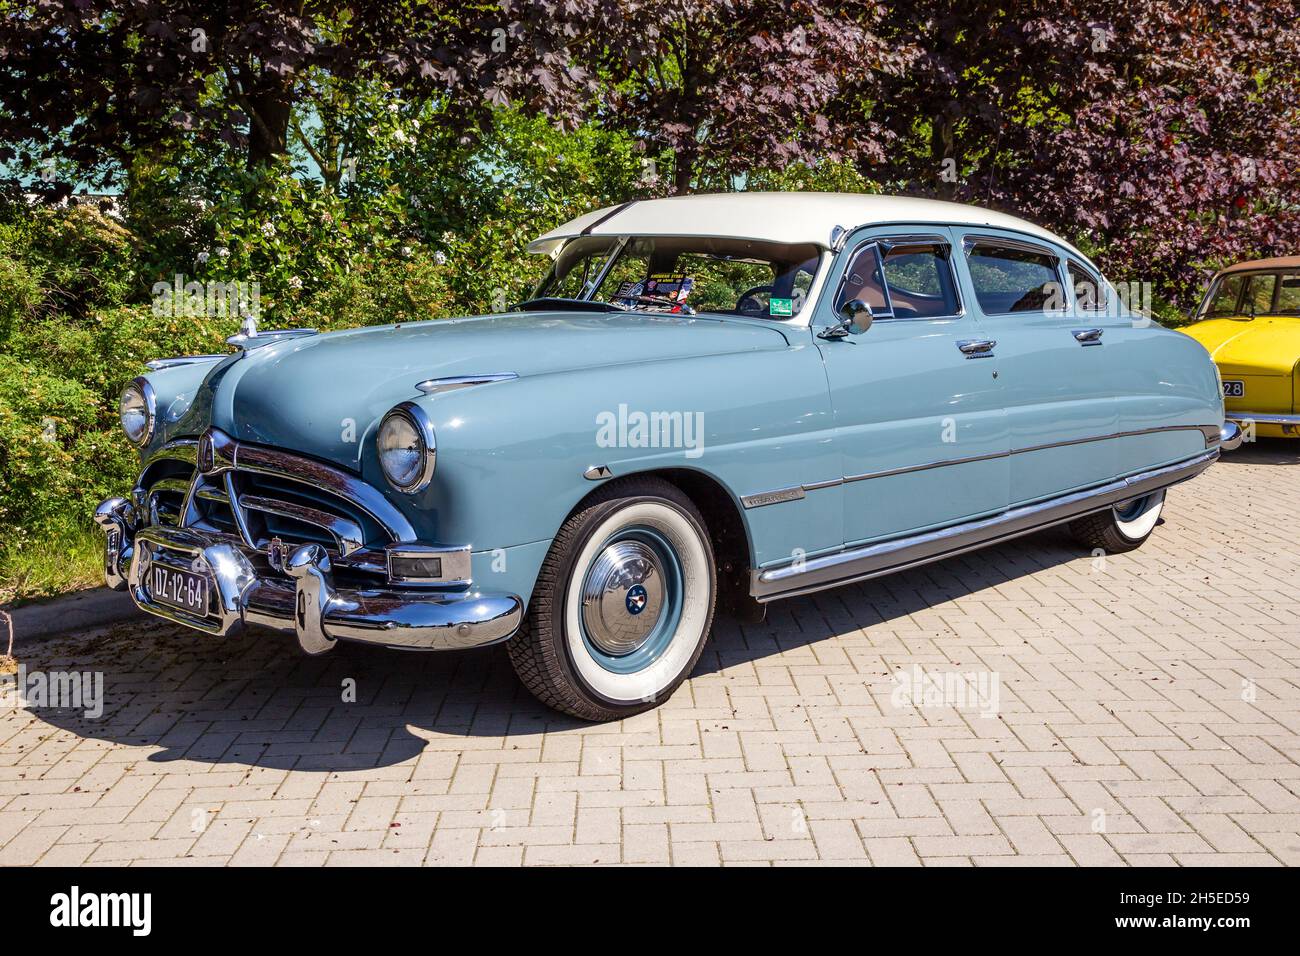 1951 Hudson Commodore 6 classic car on the parking lot. Rosmalen, The Netherlands - May 8, 2016 Stock Photo